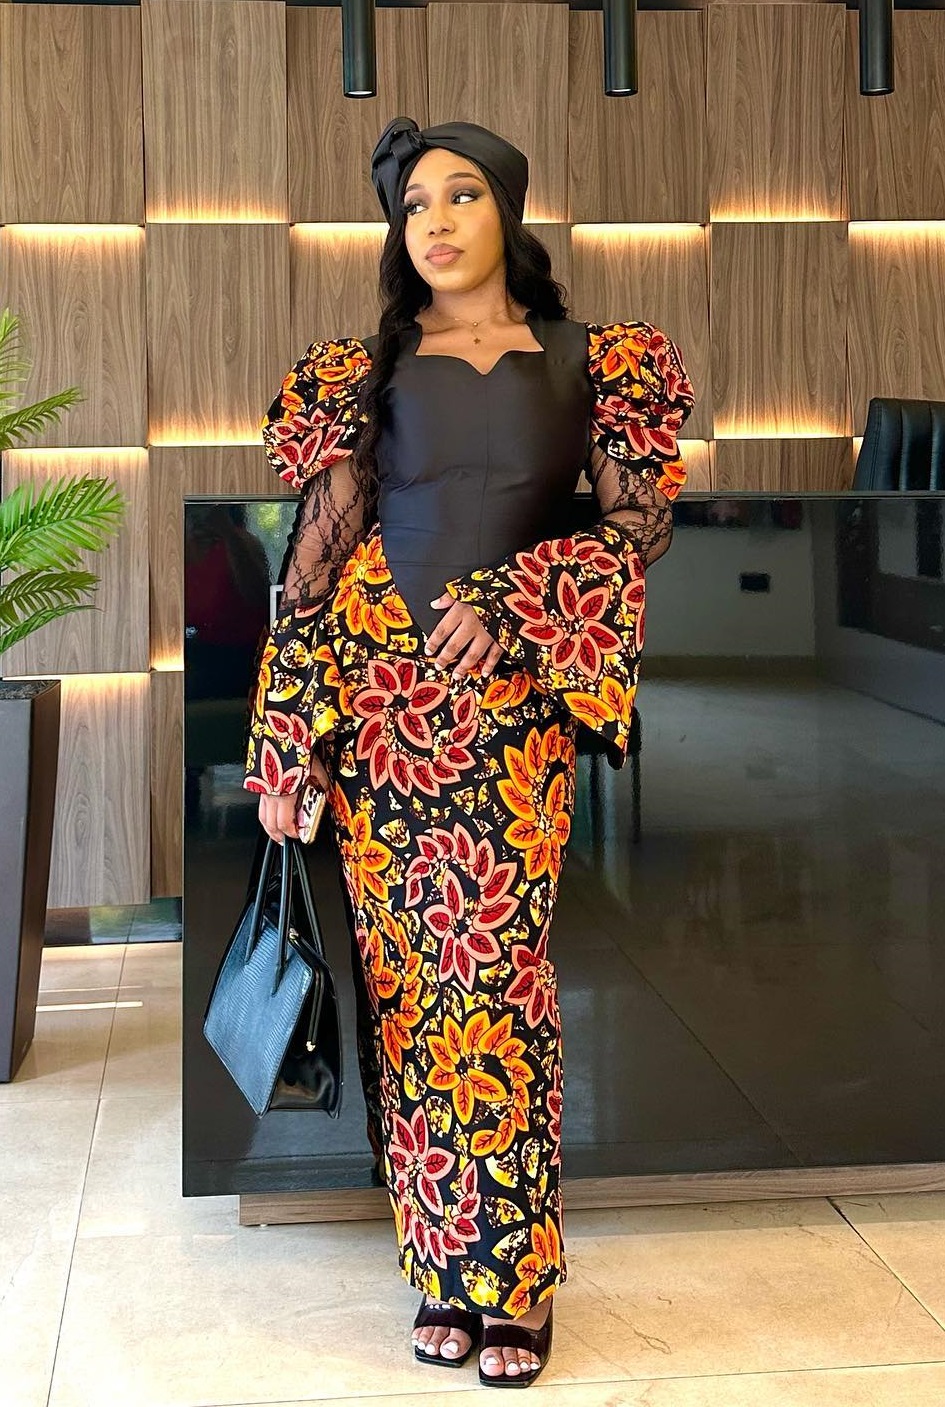 Dazzling Ankara Long Gowns Styles Should Recreate For Special Occasions ...